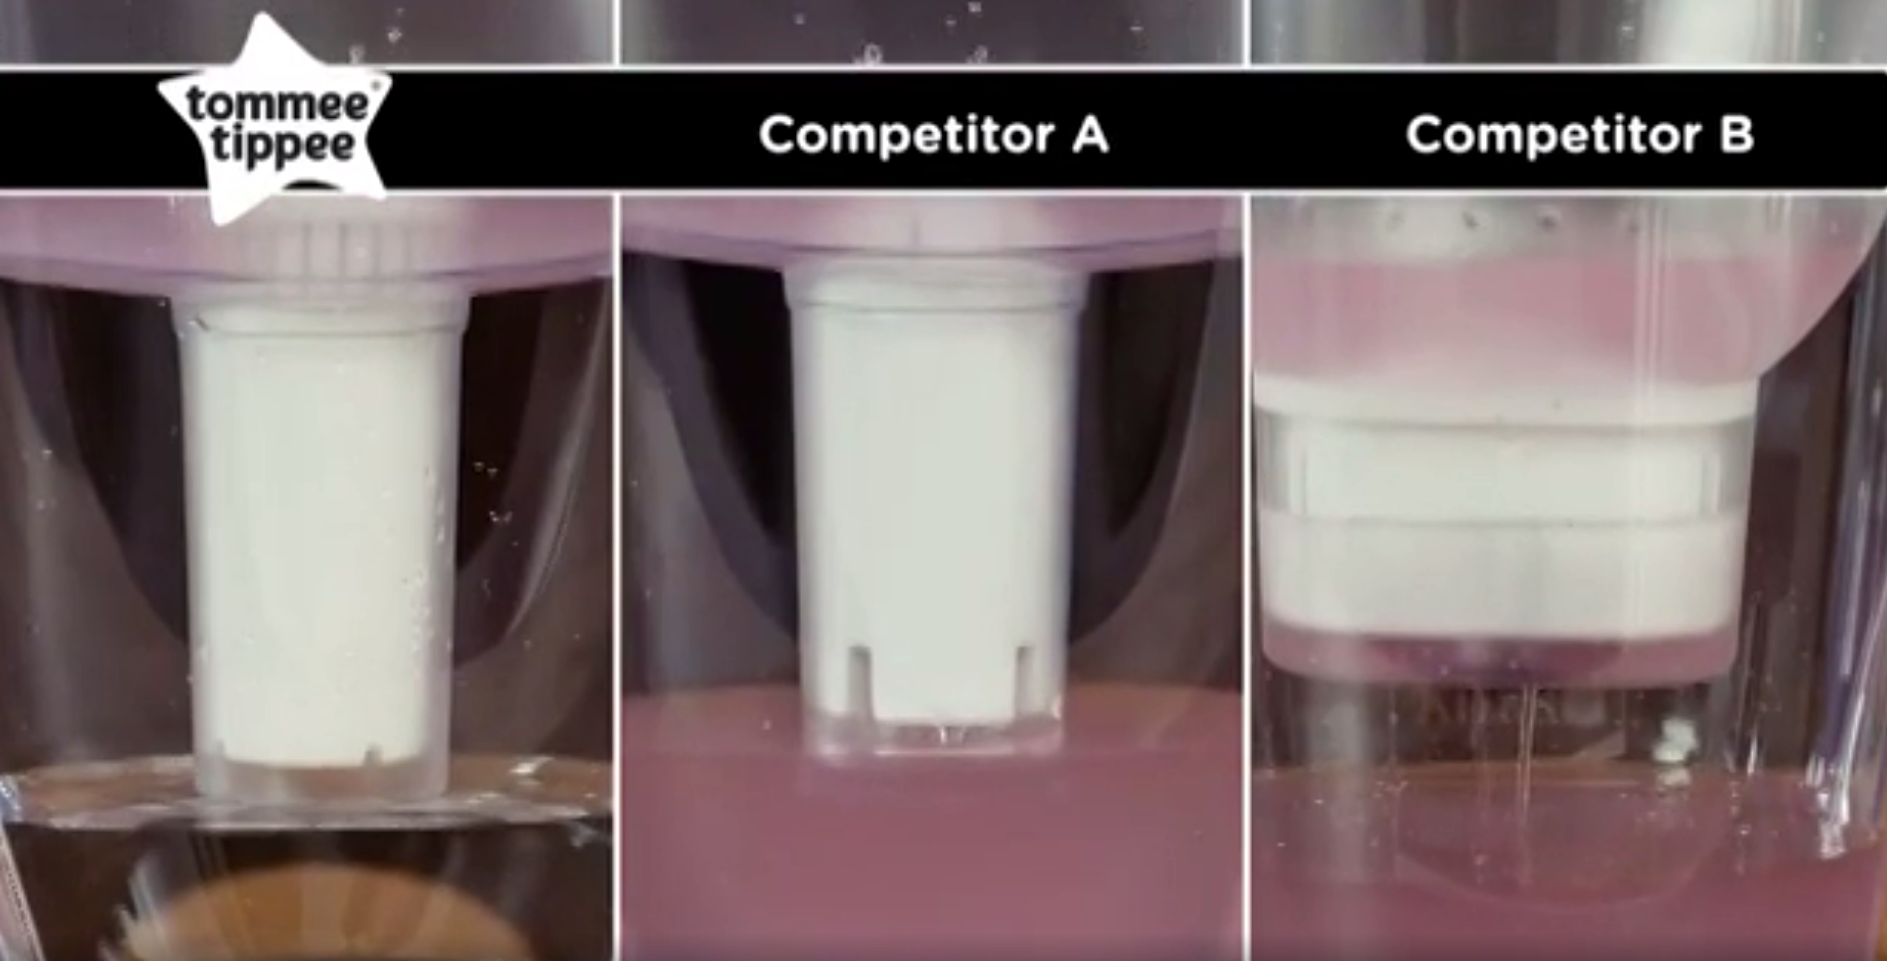 Filter competitor comparison between competitor A, B & Tommee Tippee